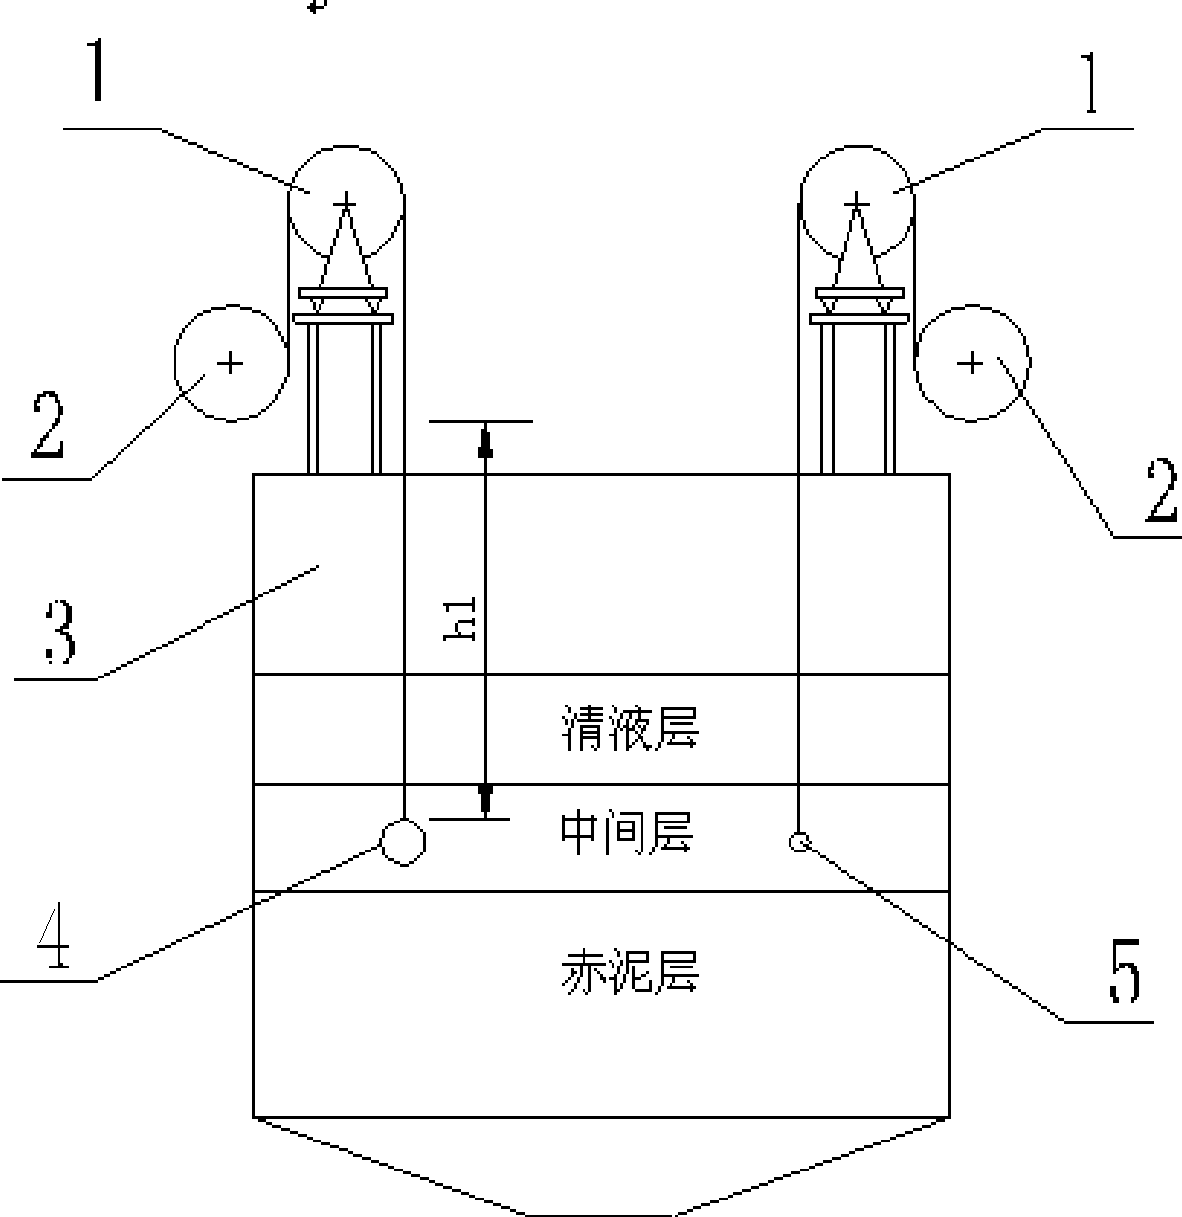 Interface analysis apparatus for double-floating ball red mud setting tank